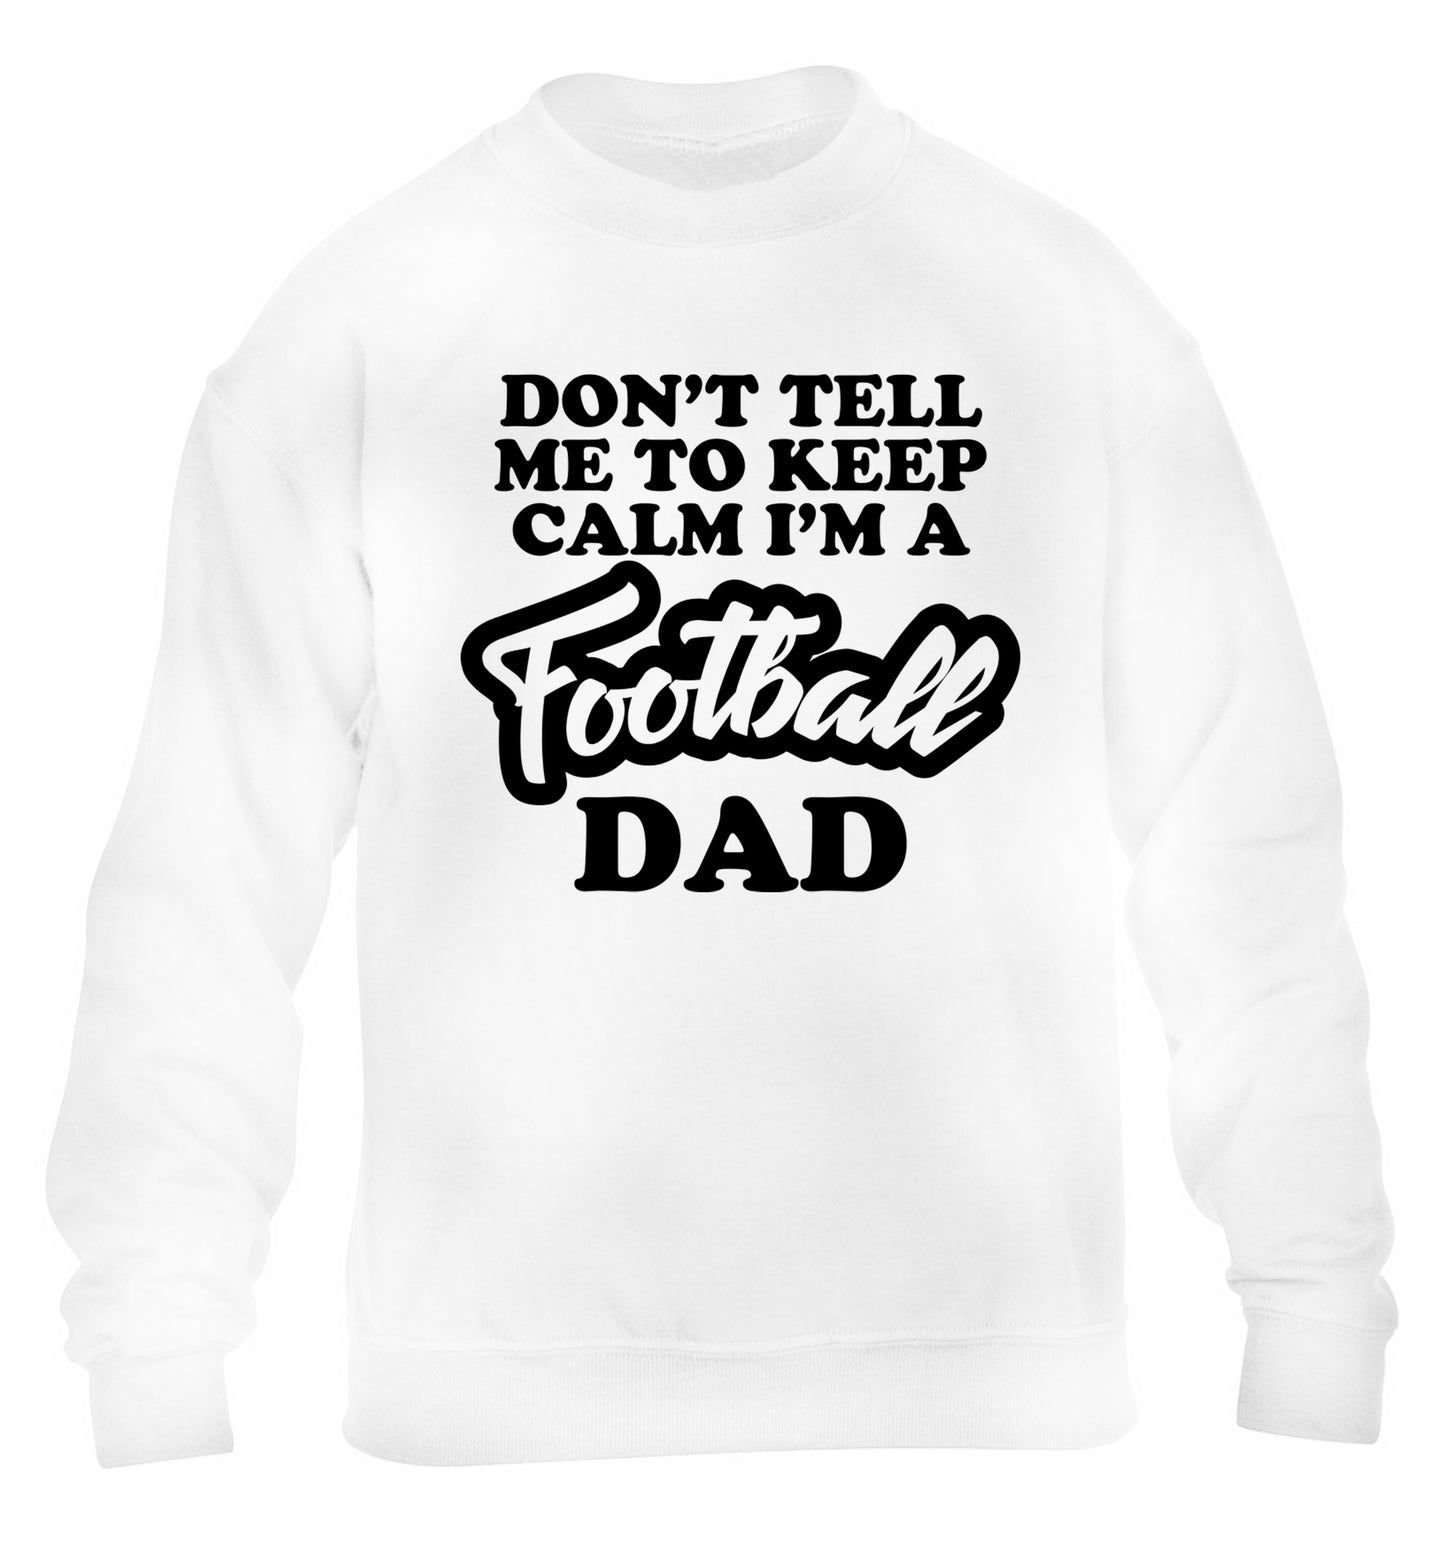 Don't tell me to keep calm I'm a football grandad children's white sweater 12-14 Years